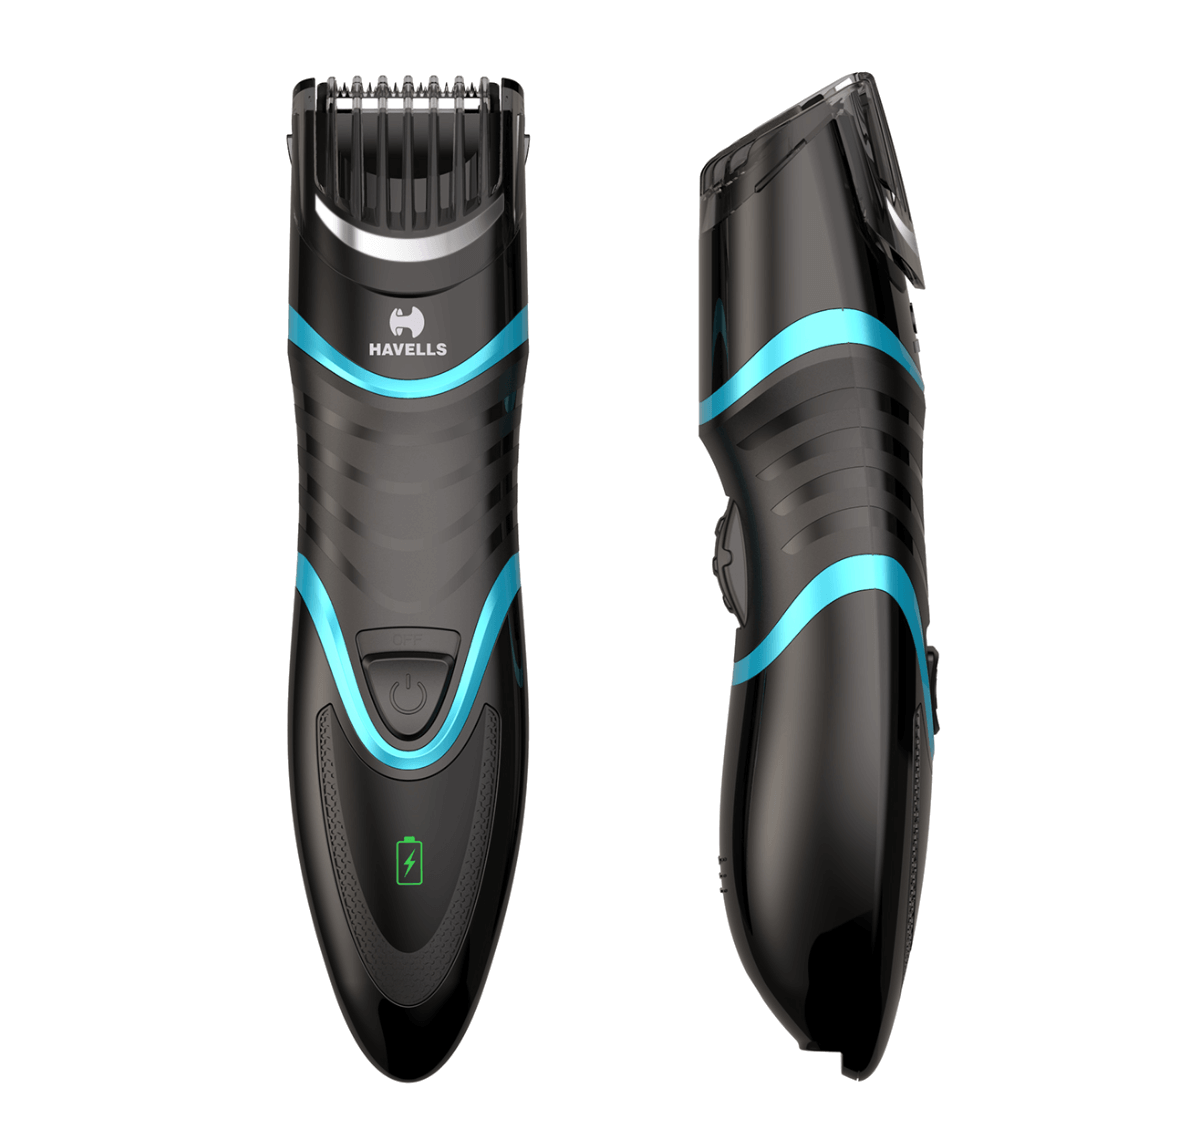 USB Quick Charge Zoom Wheel Beard Trimmer (Black/Blue)